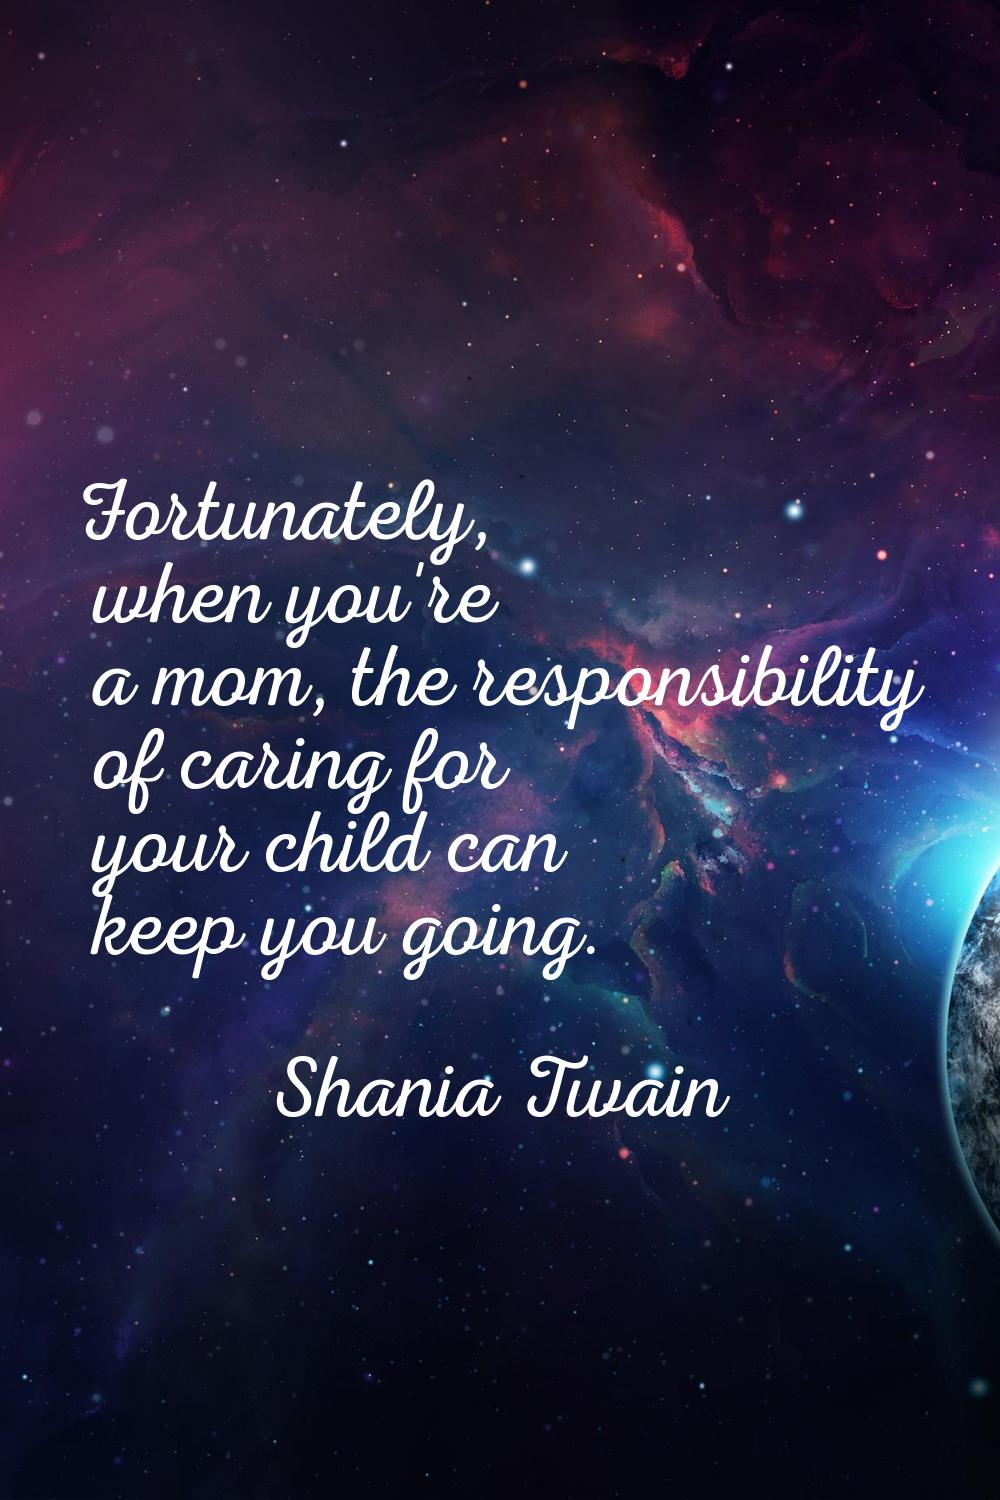 Fortunately, when you're a mom, the responsibility of caring for your child can keep you going.